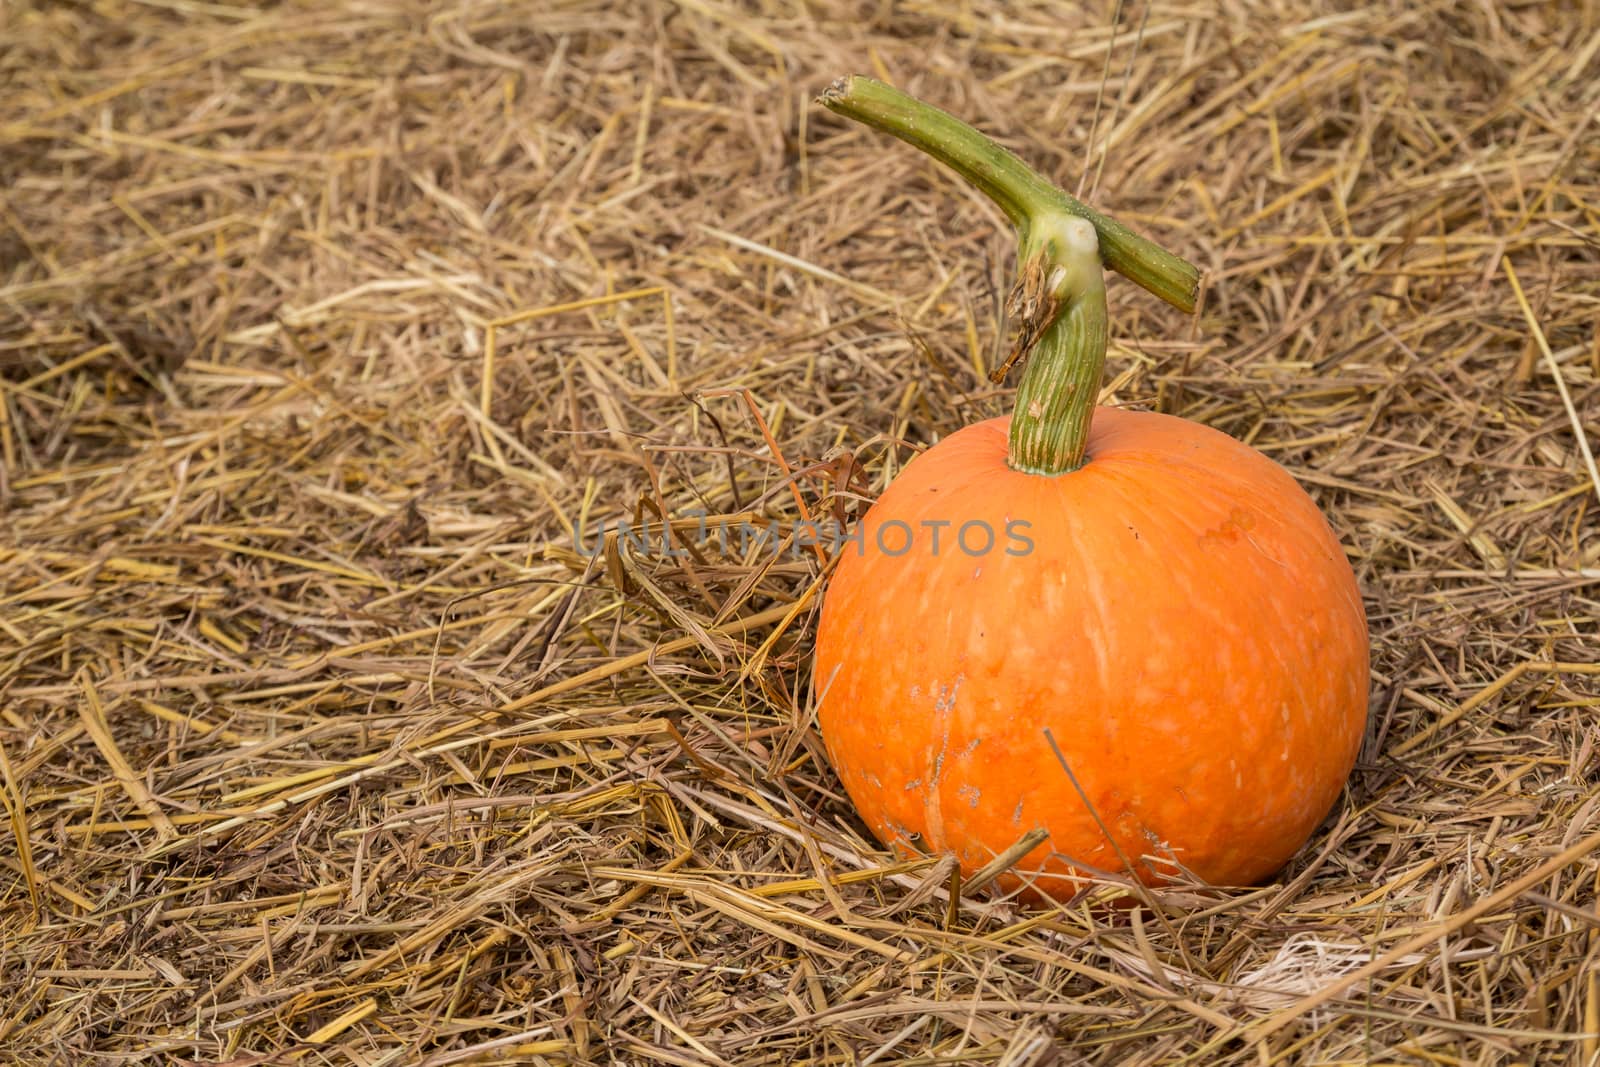 Pumpkin on the straw in the background.